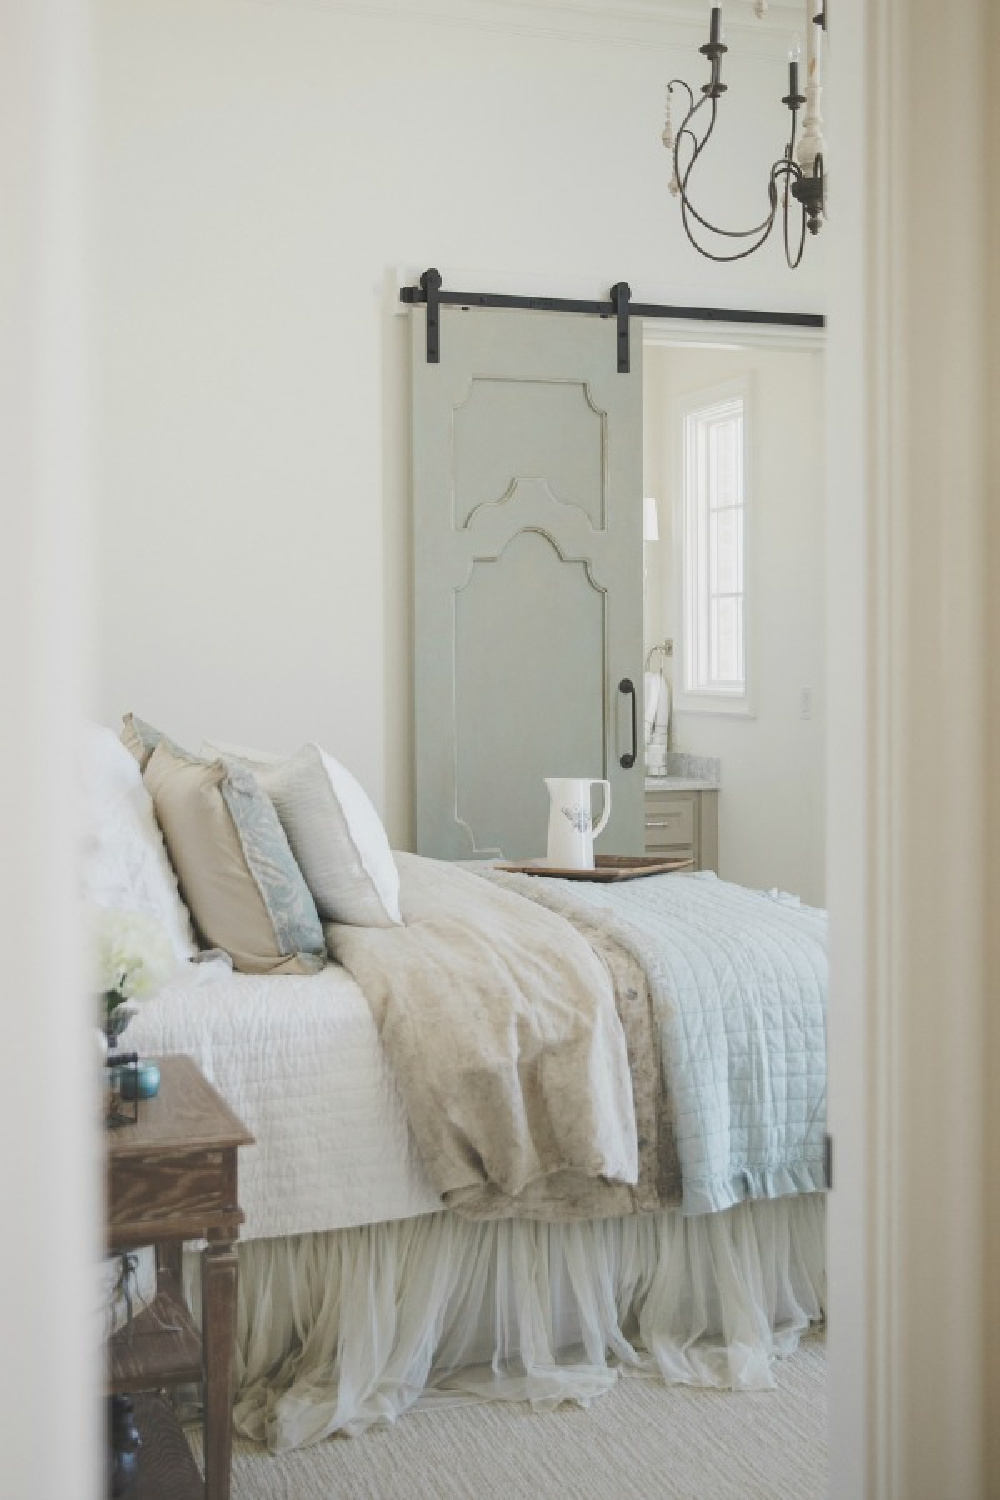 French country farmhouse pale blue and white bedroom with Duck Egg blue barn door. Sherwin Williams Alabaster paint color on walls. Brit Jones Design.